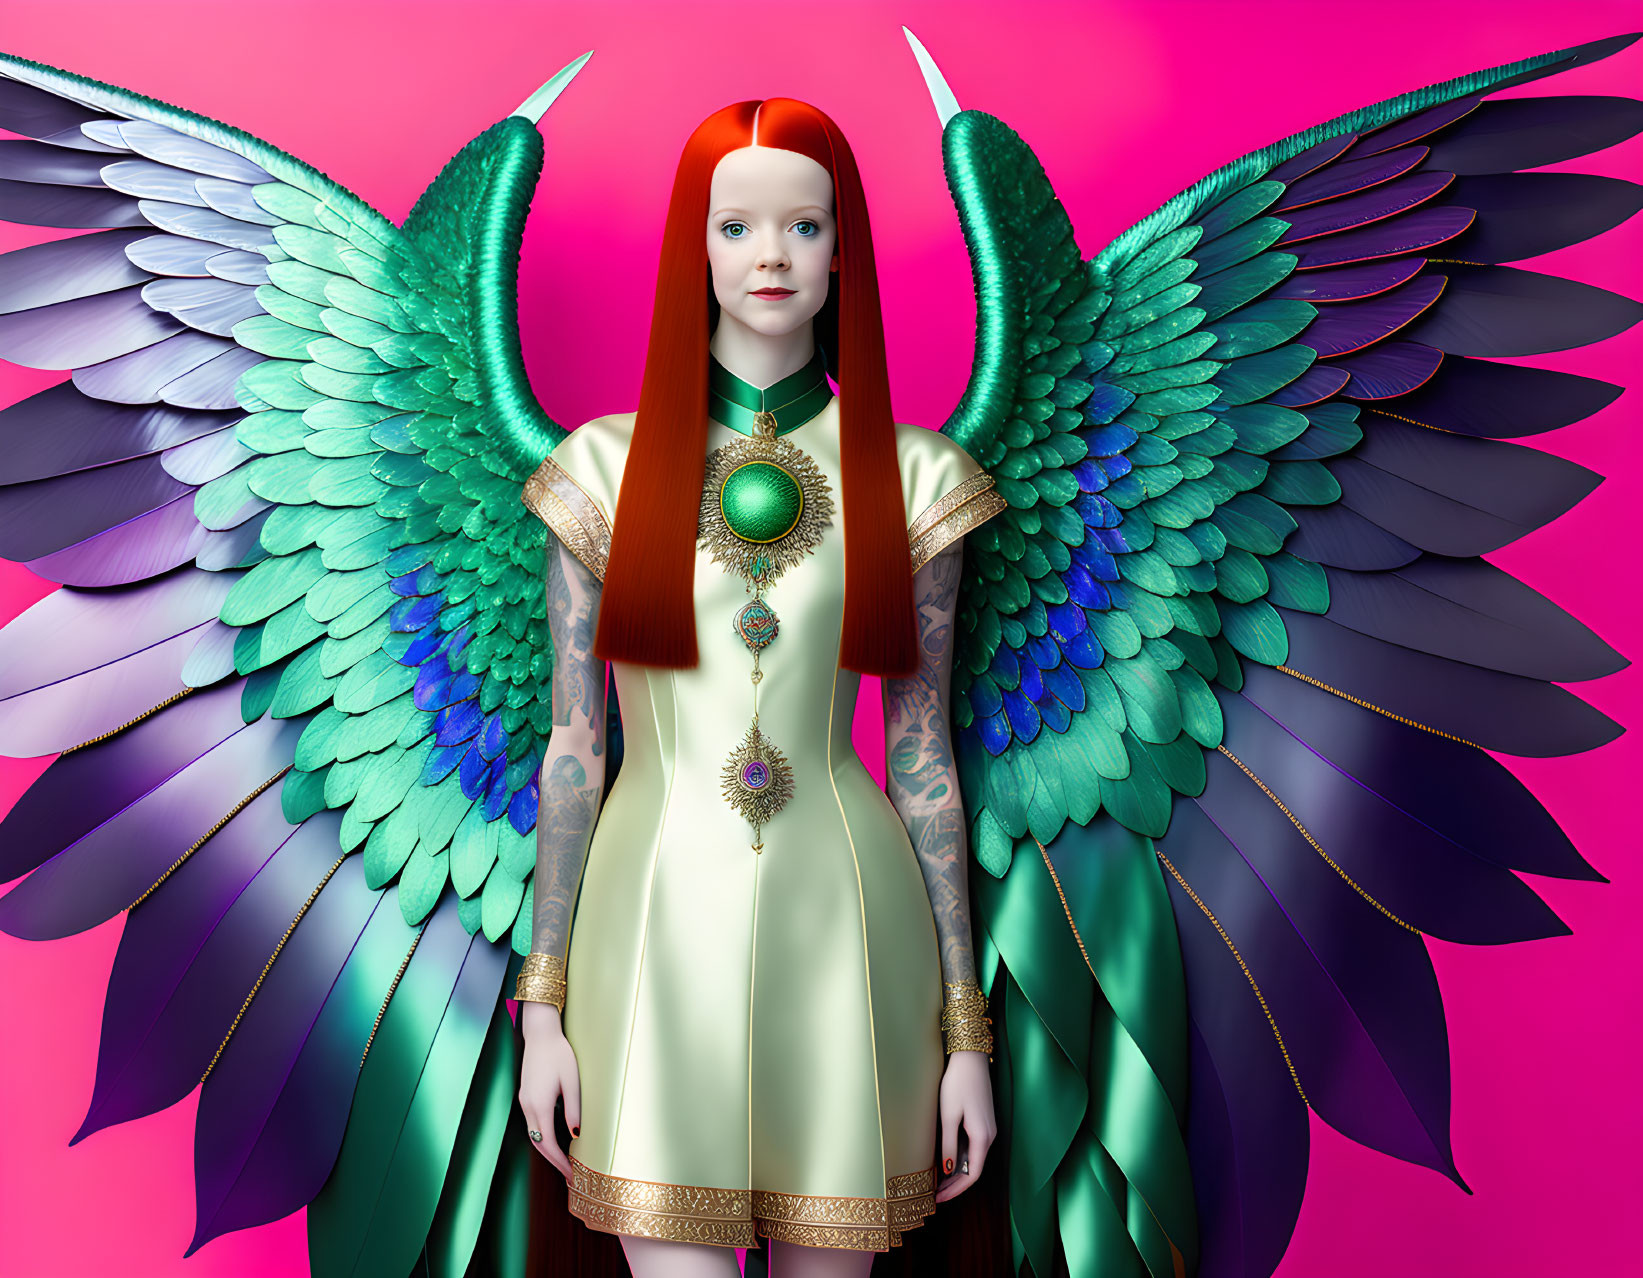 Vibrant female figure with blue and green wings and red hair on pink background